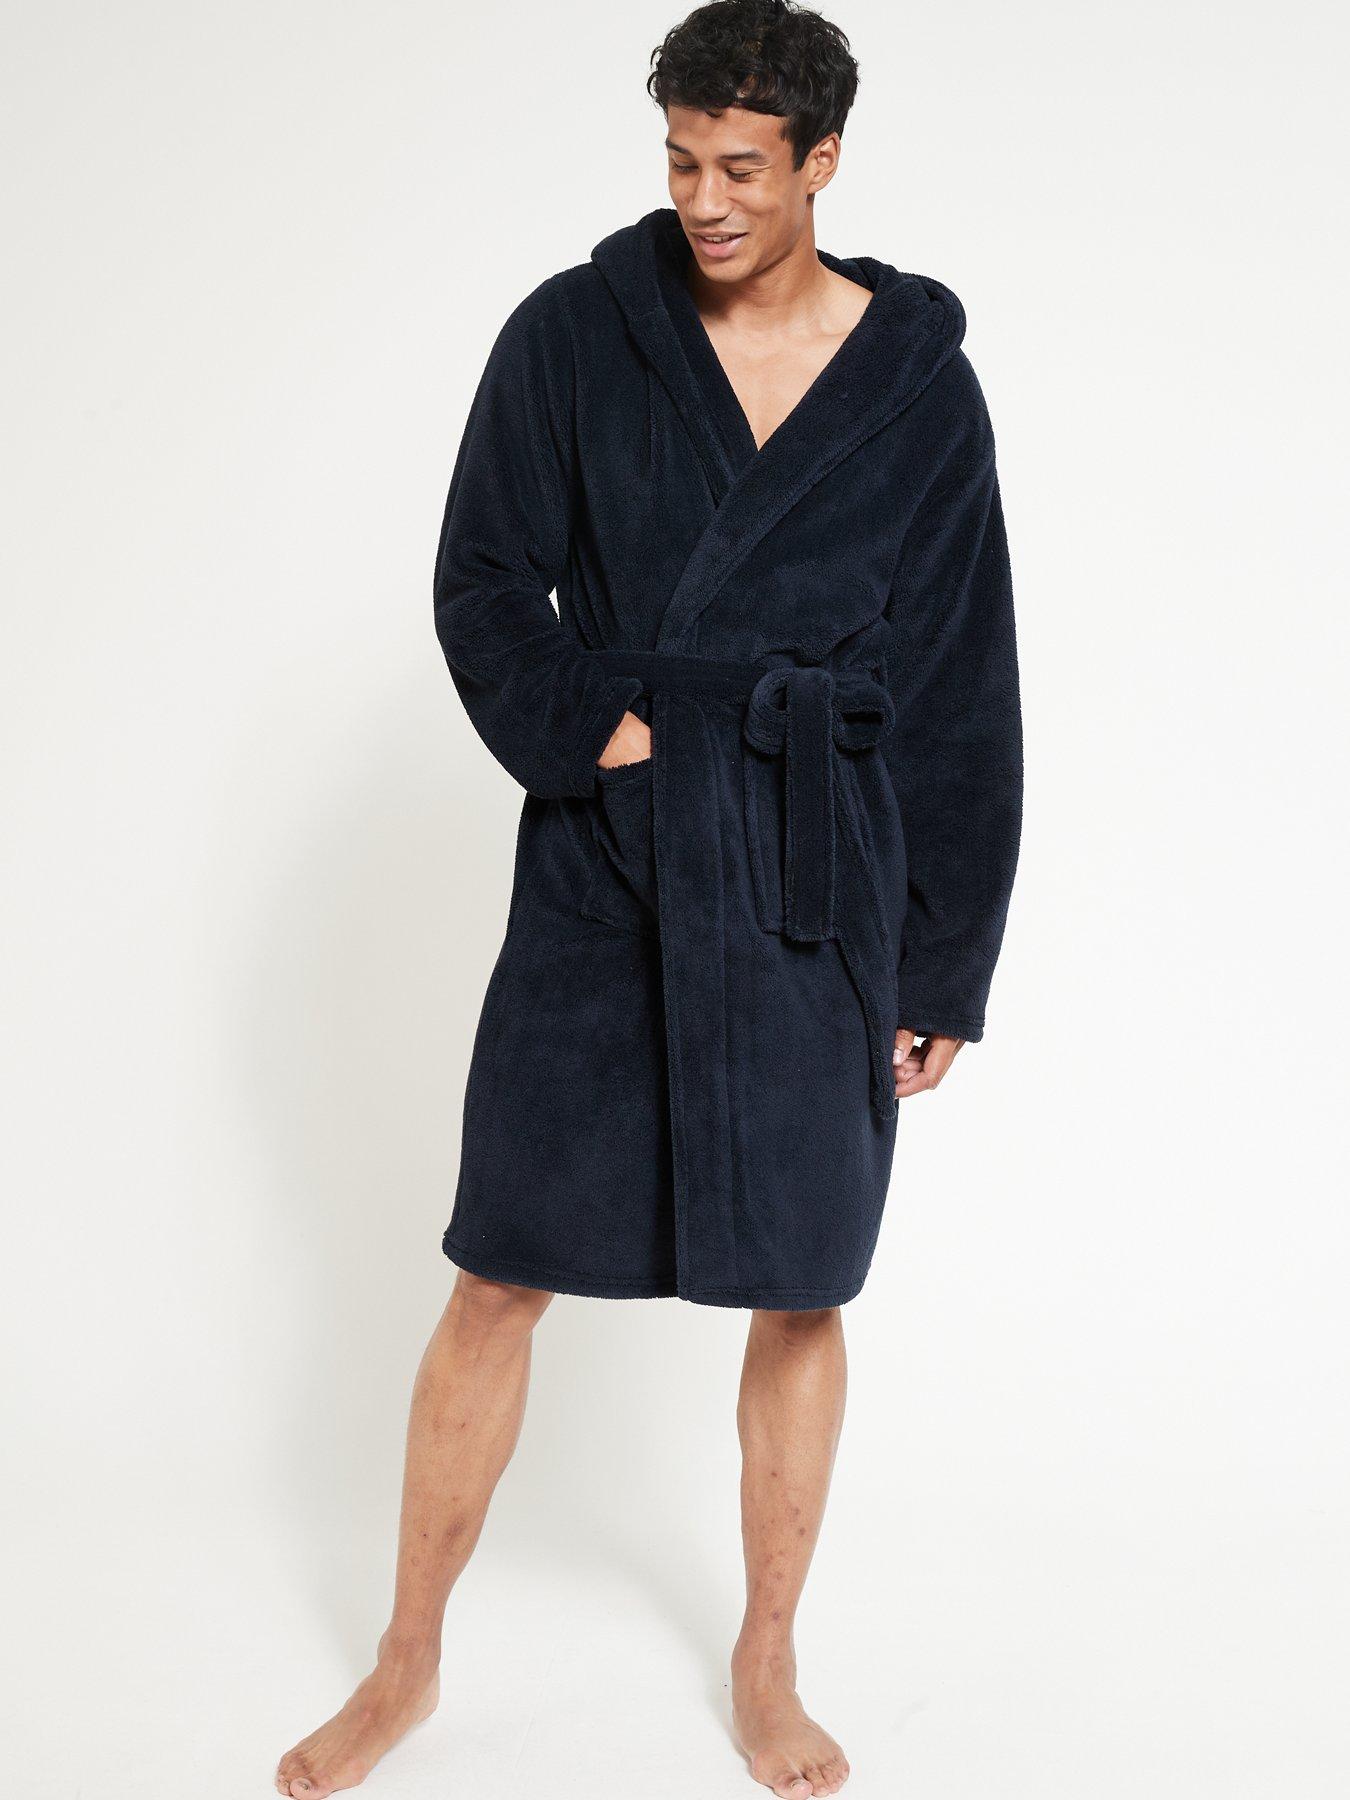 Everyday Supersoft Dressing Gown with Hood - Grey